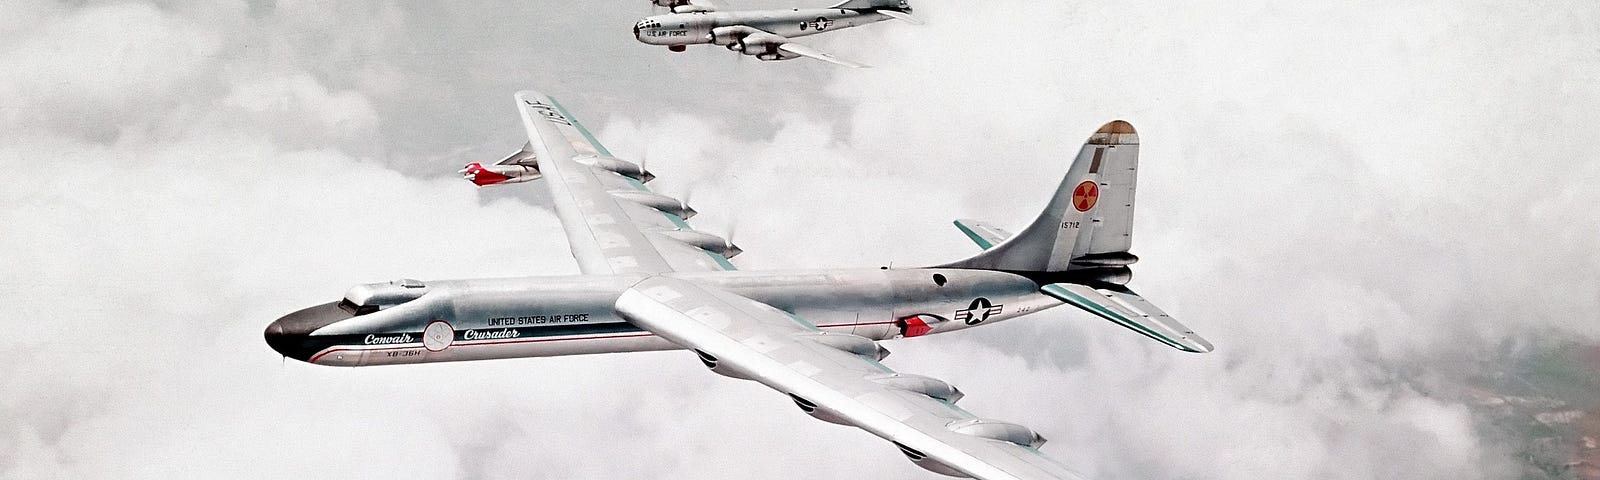 Aircraft The Convair NB-36 ‘Crusader’ Carried A 17 Ton Nuclear Reactor In A Bomb Bay 47 test flights without dropping the ball